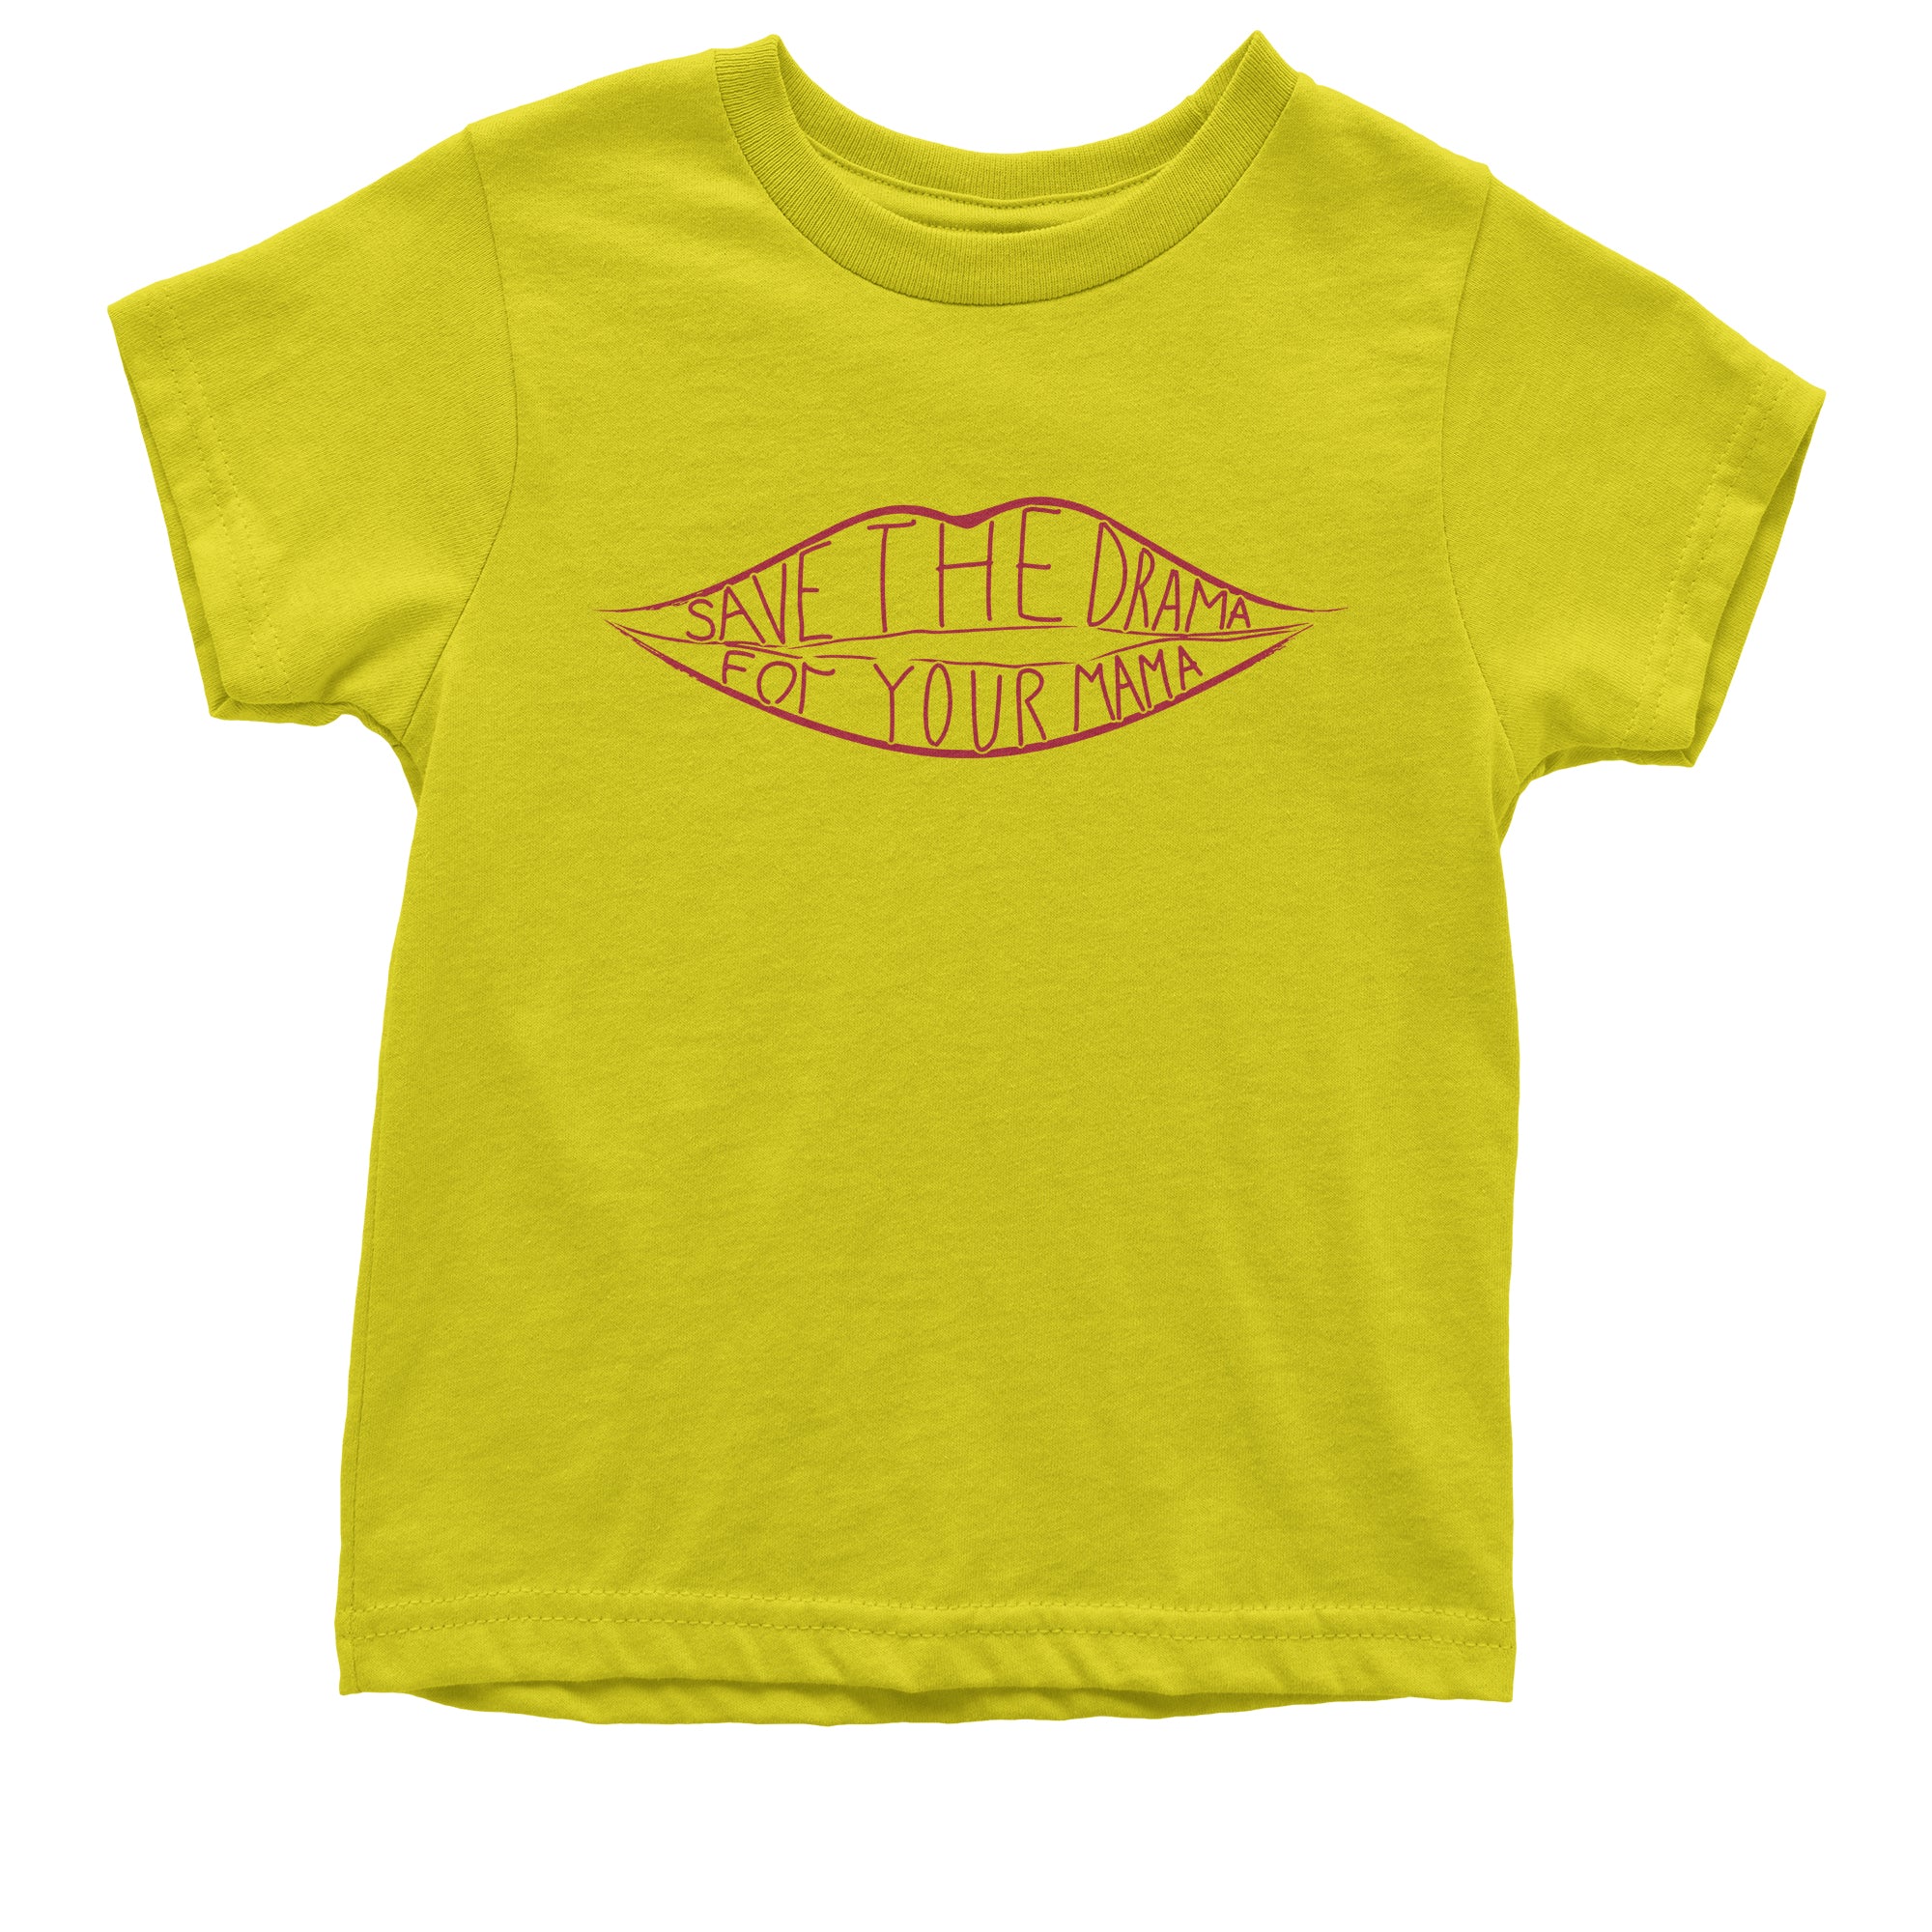 Save The Drama For Your Mama Kid's T-Shirt